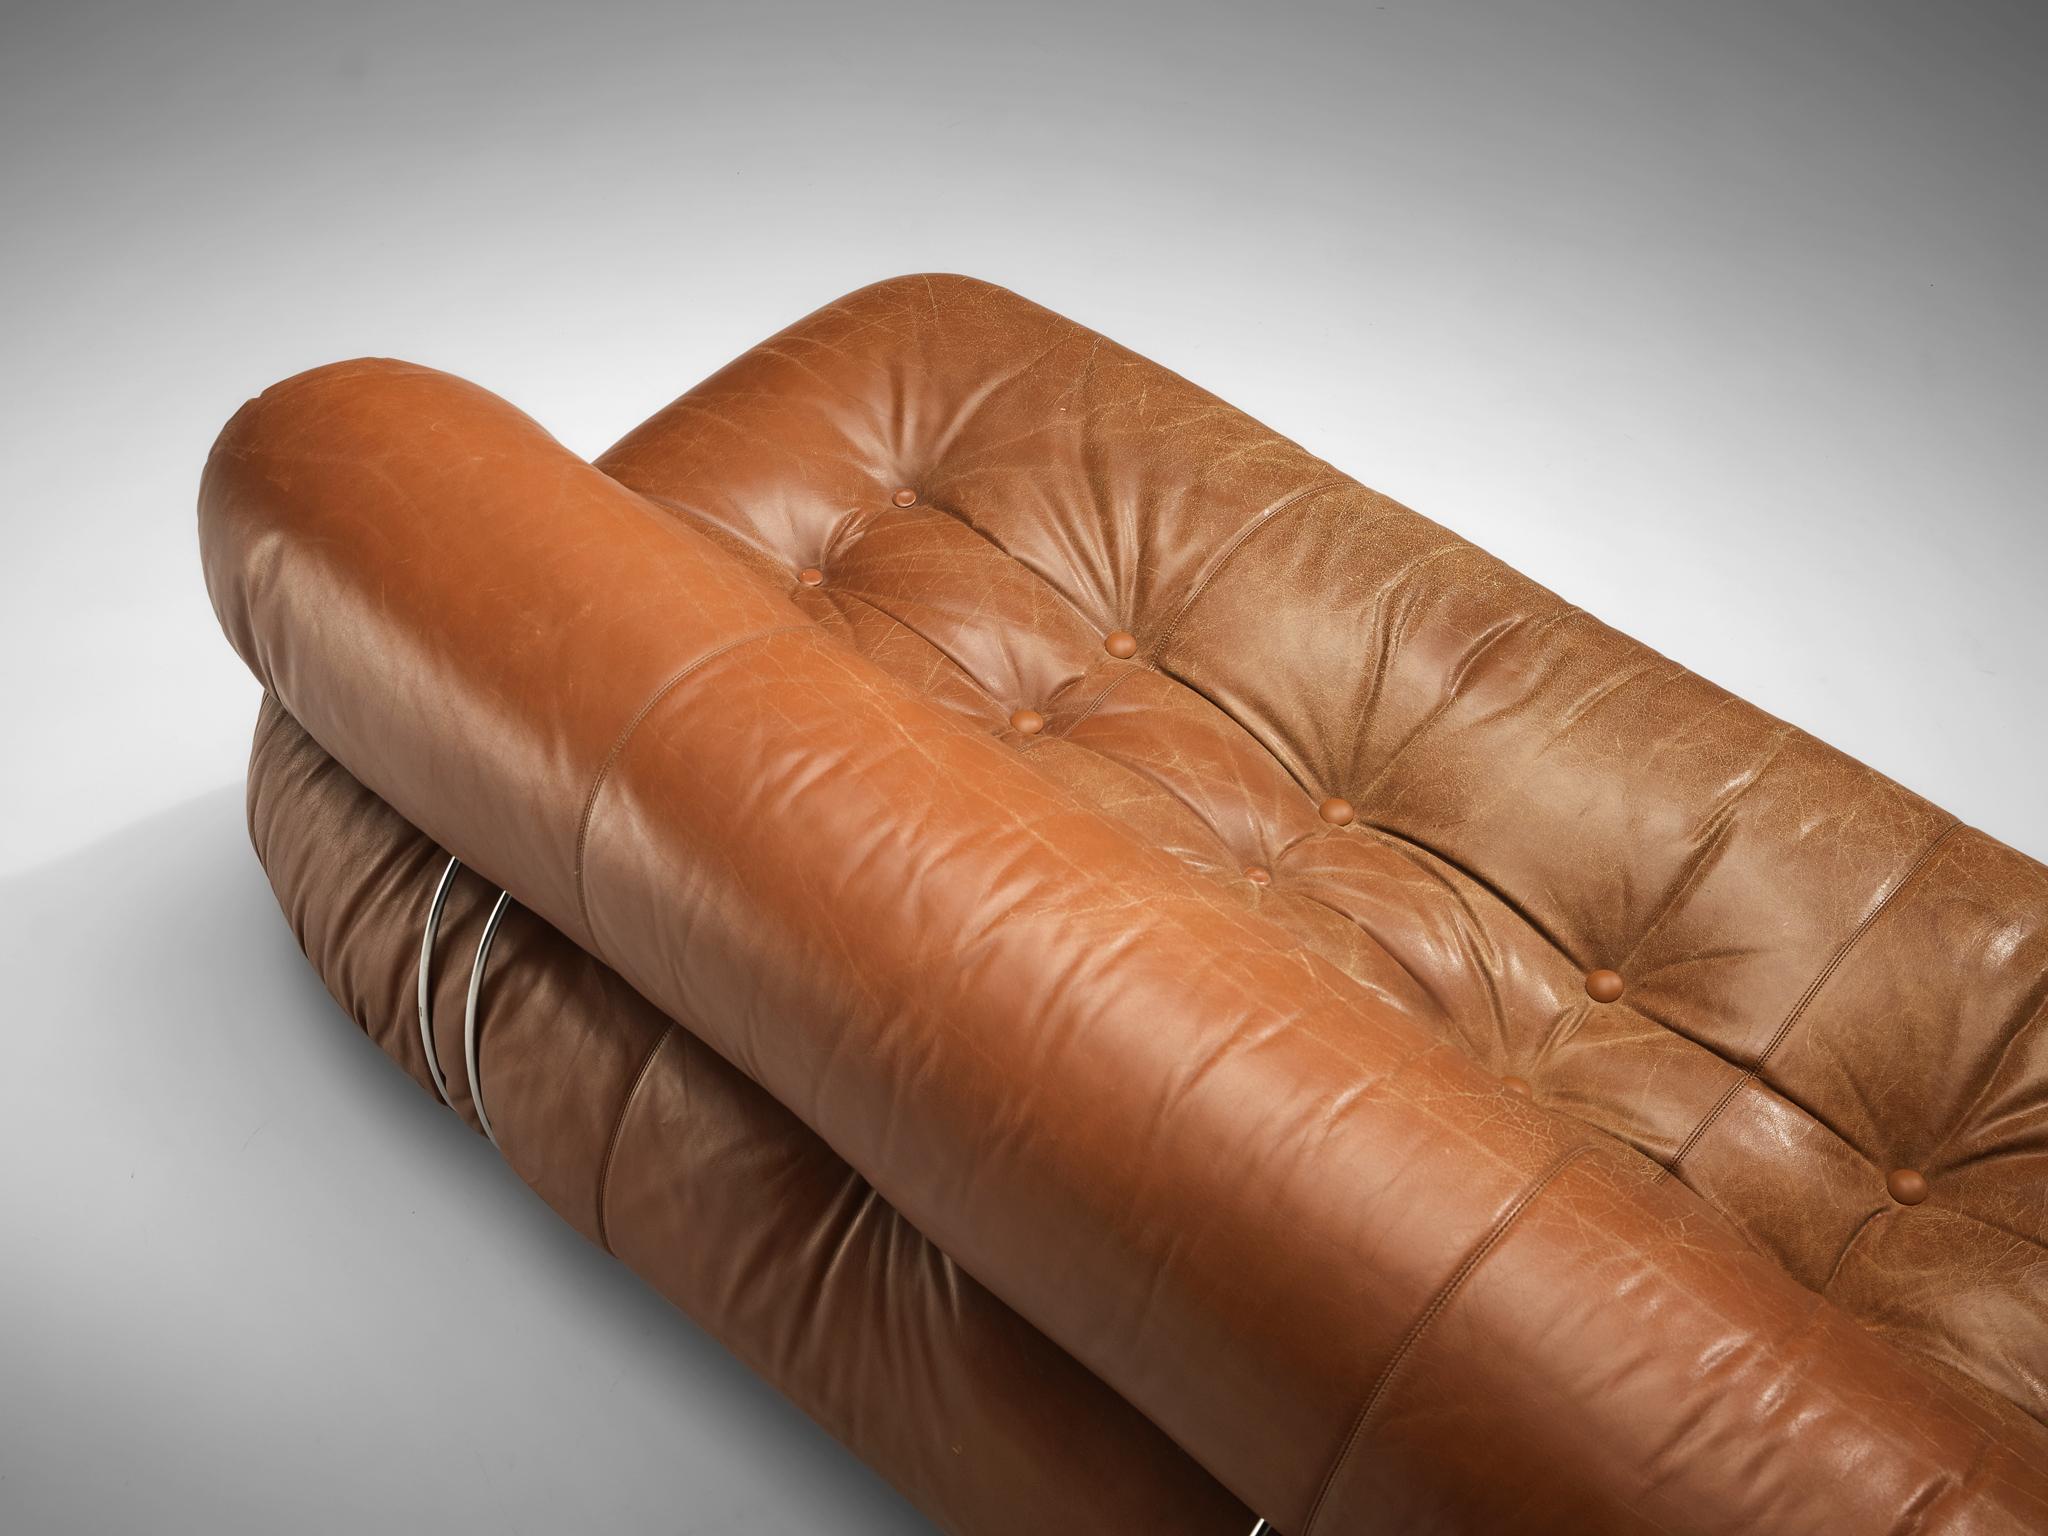 Listing for D: Afra & Tobia Scarpa 'Soriana' Sofa in Patinated Brown Leather 1